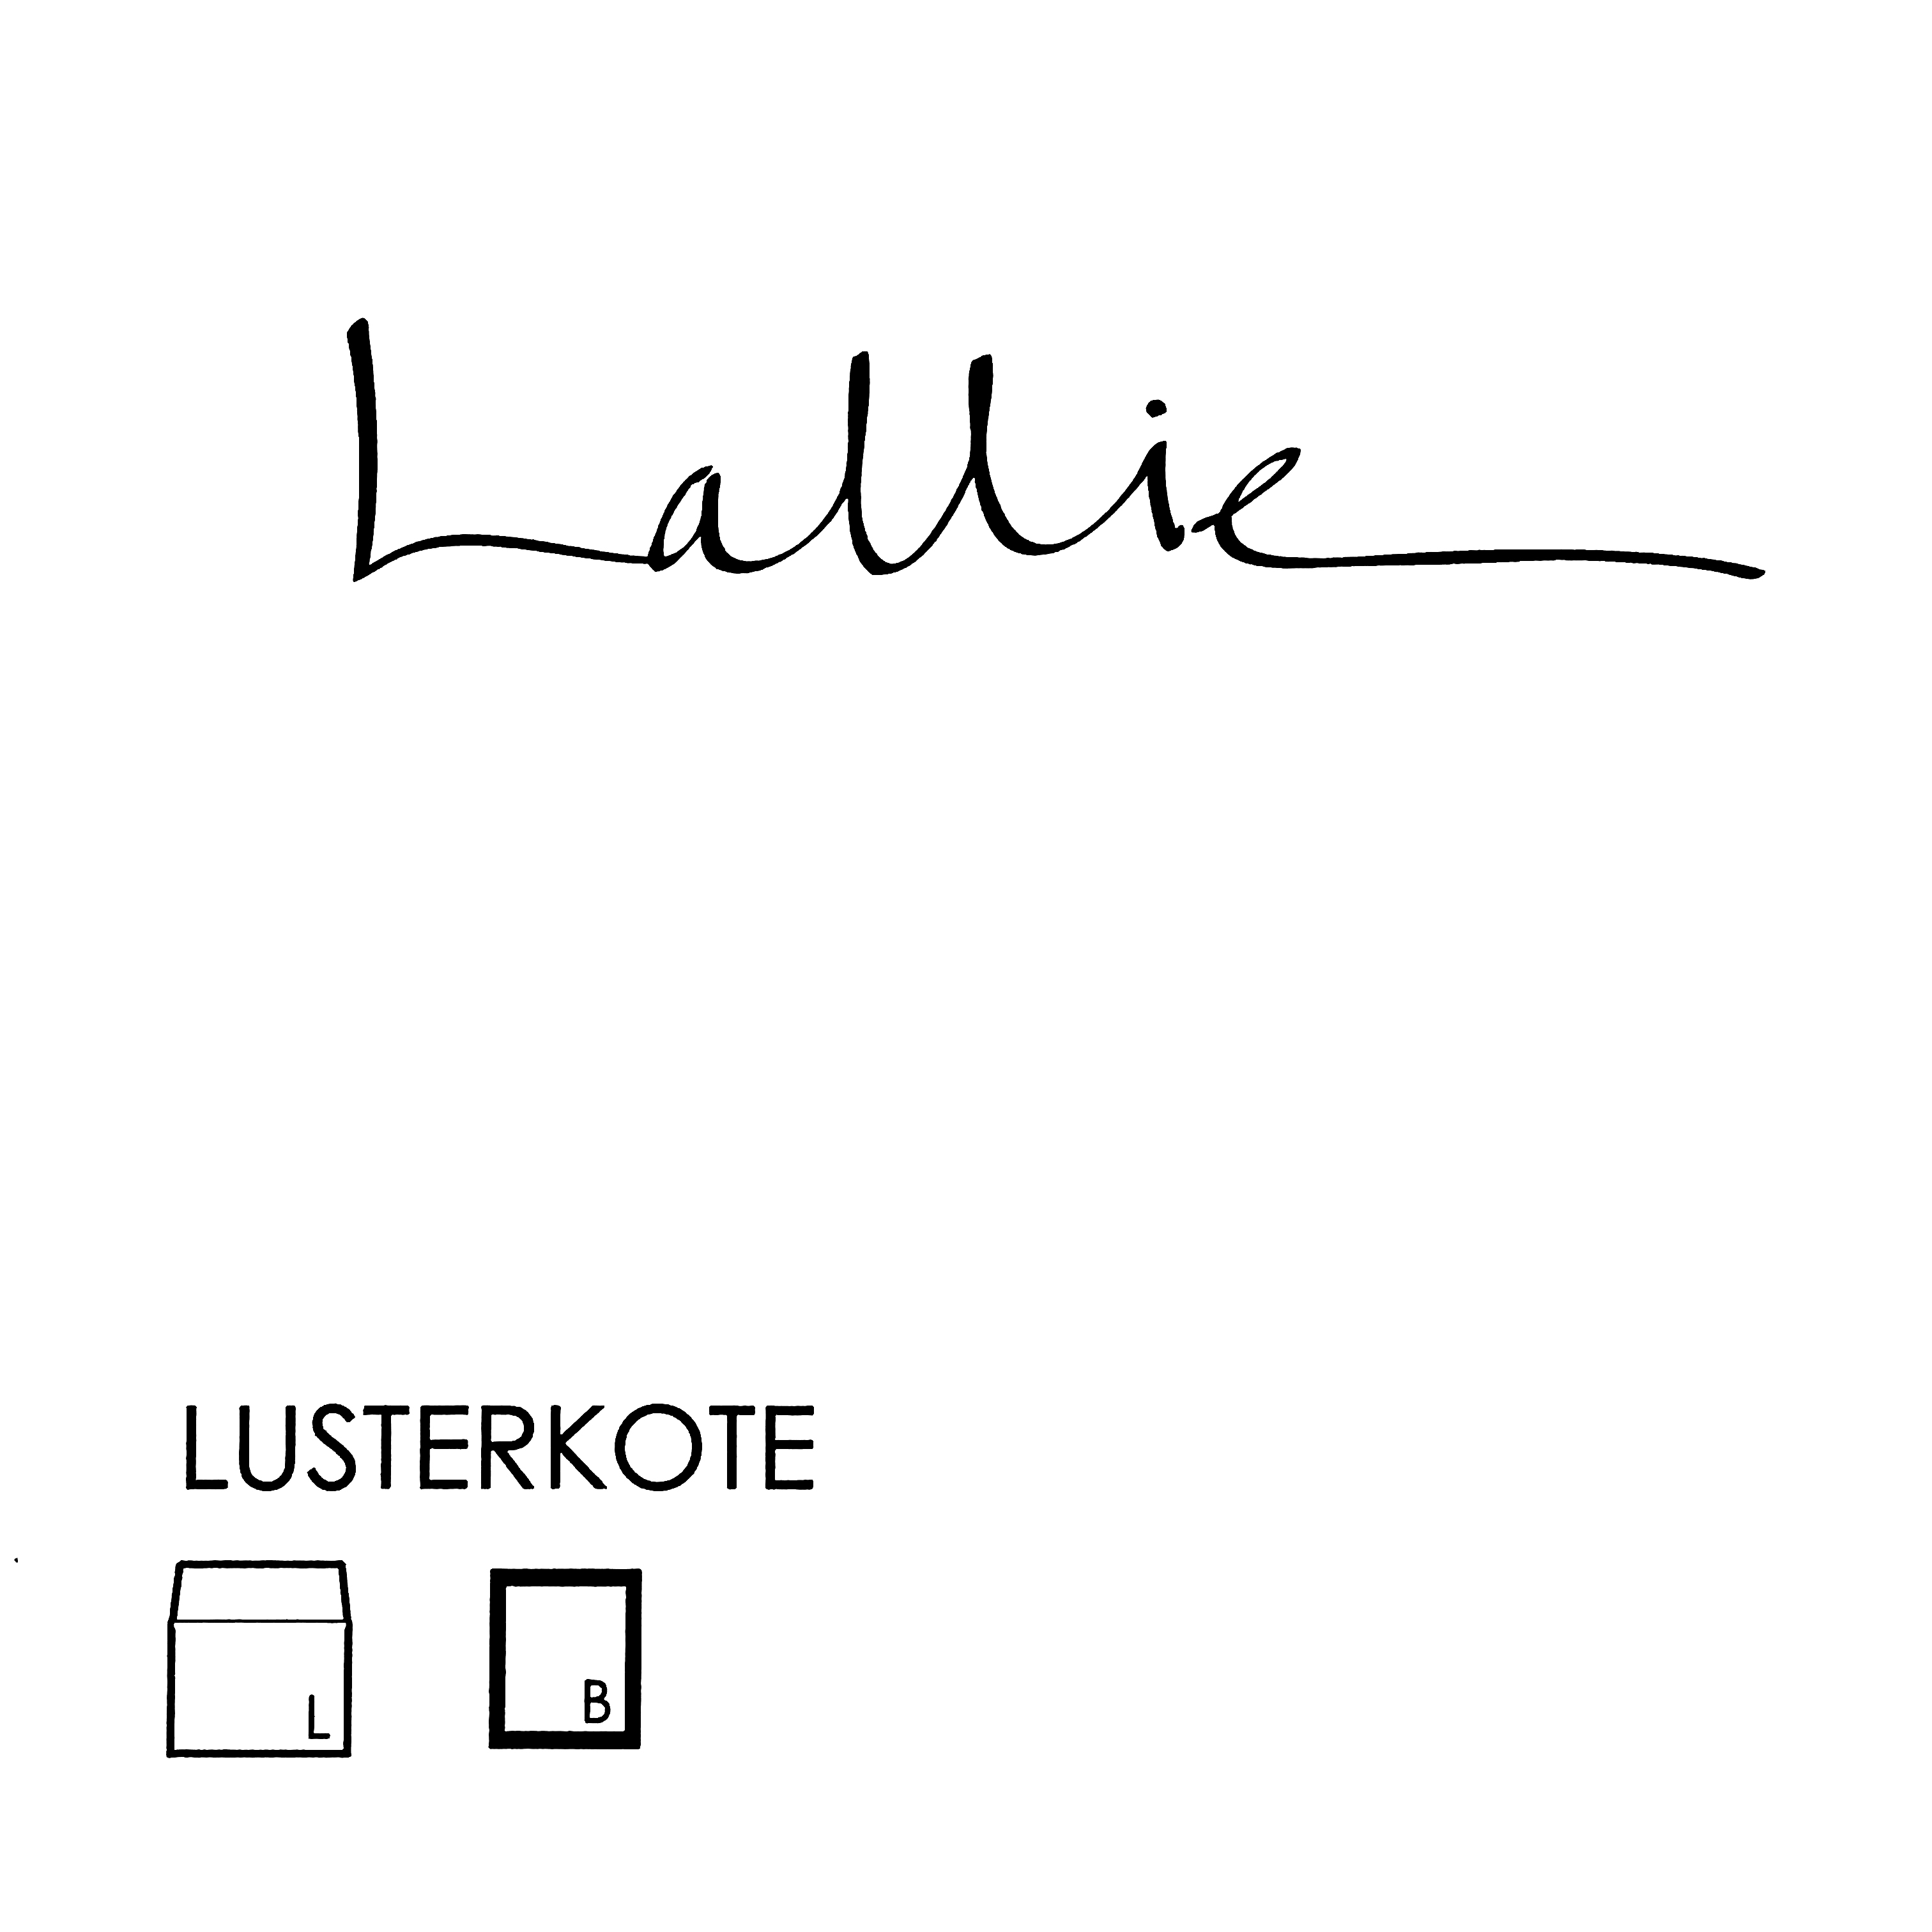 Lusterkote (glossy)